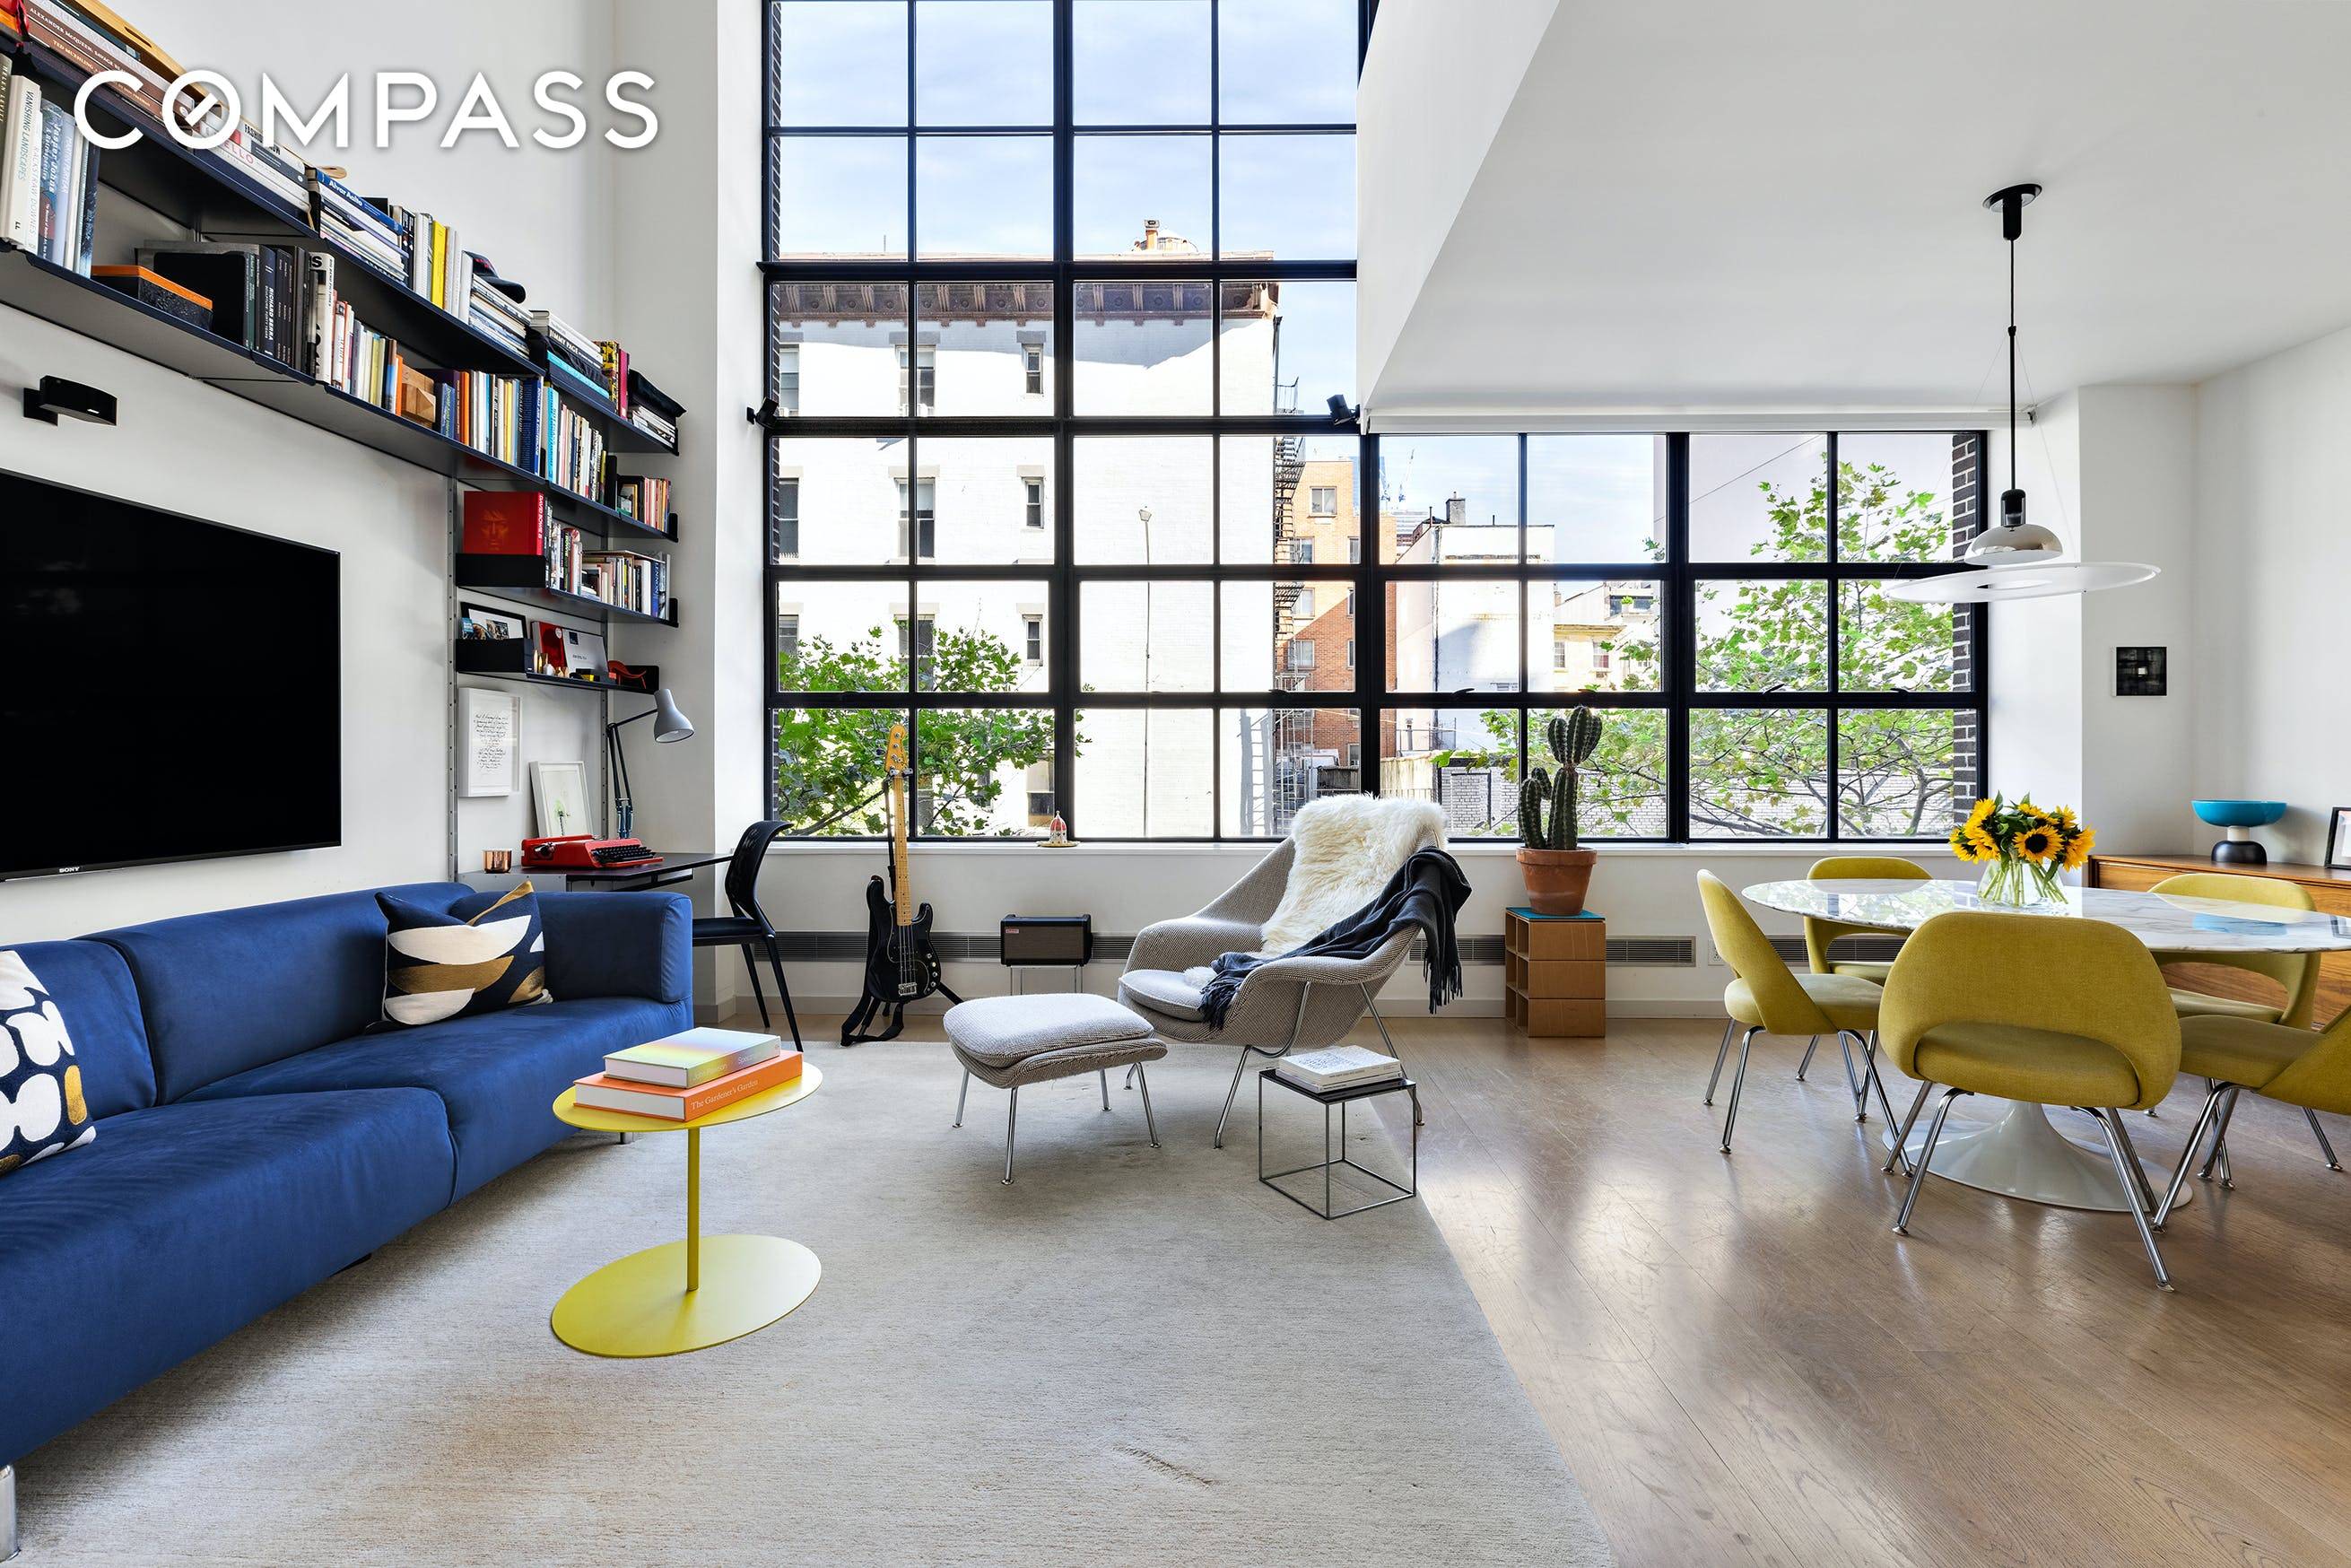 A West Chelsea boutique condo loft by renowned architect Cary Tamarkin.